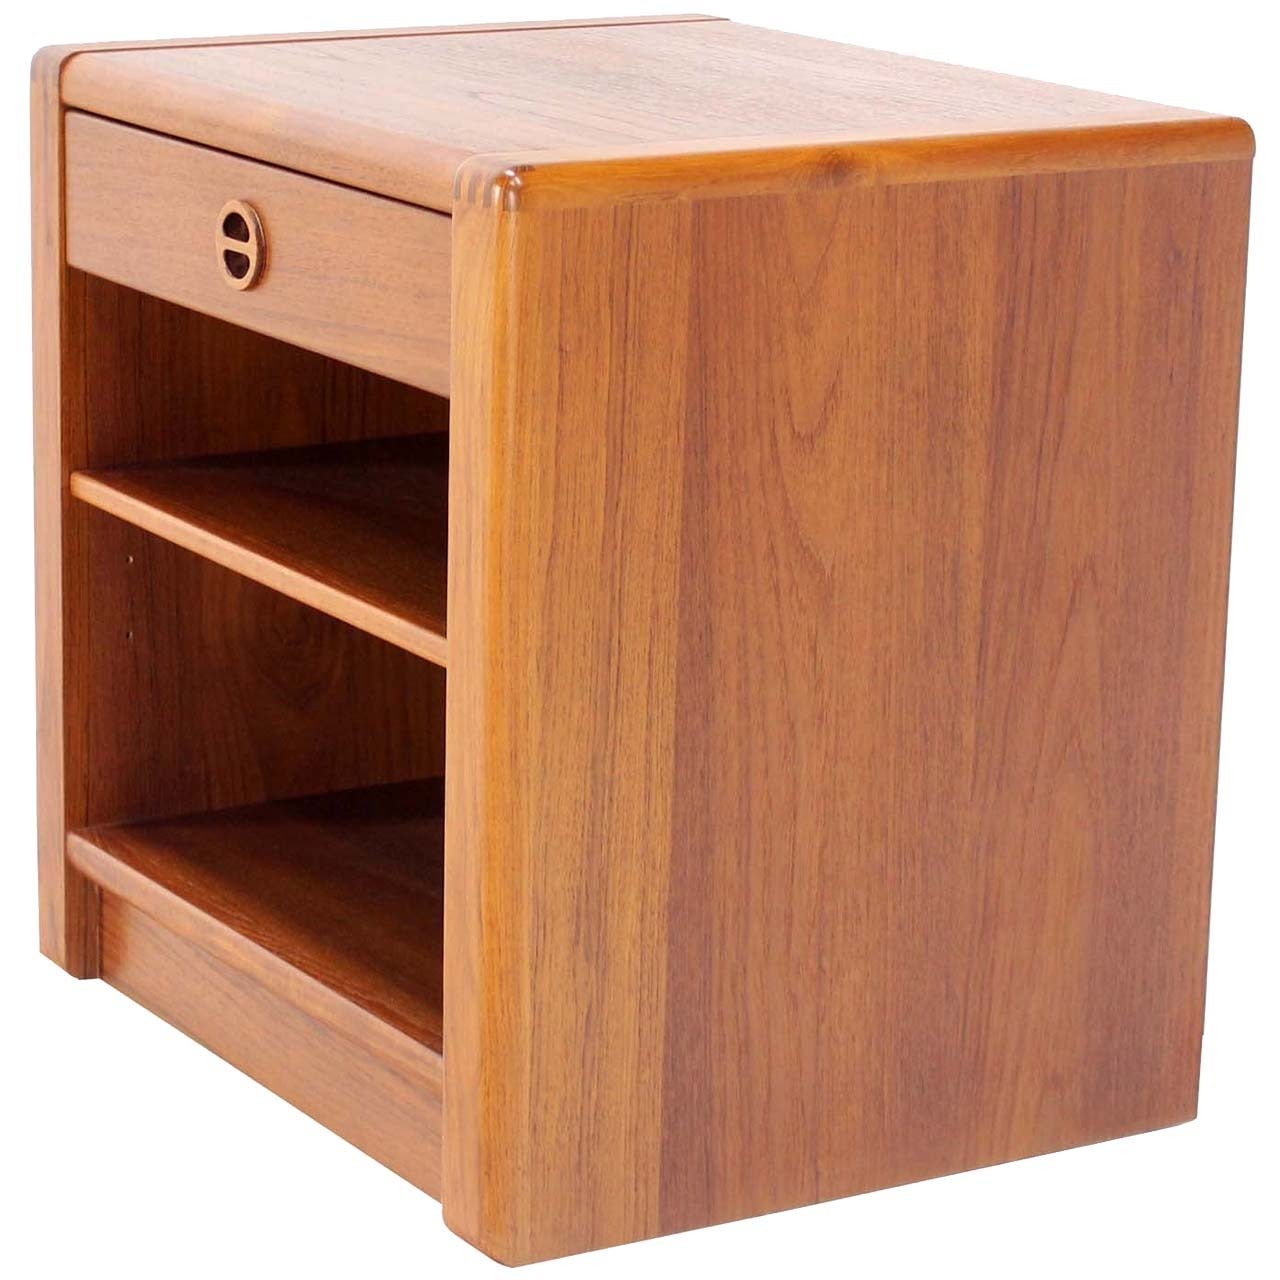 Danish Mid-Century Modern Teak One-Drawer End Table or Night Stand